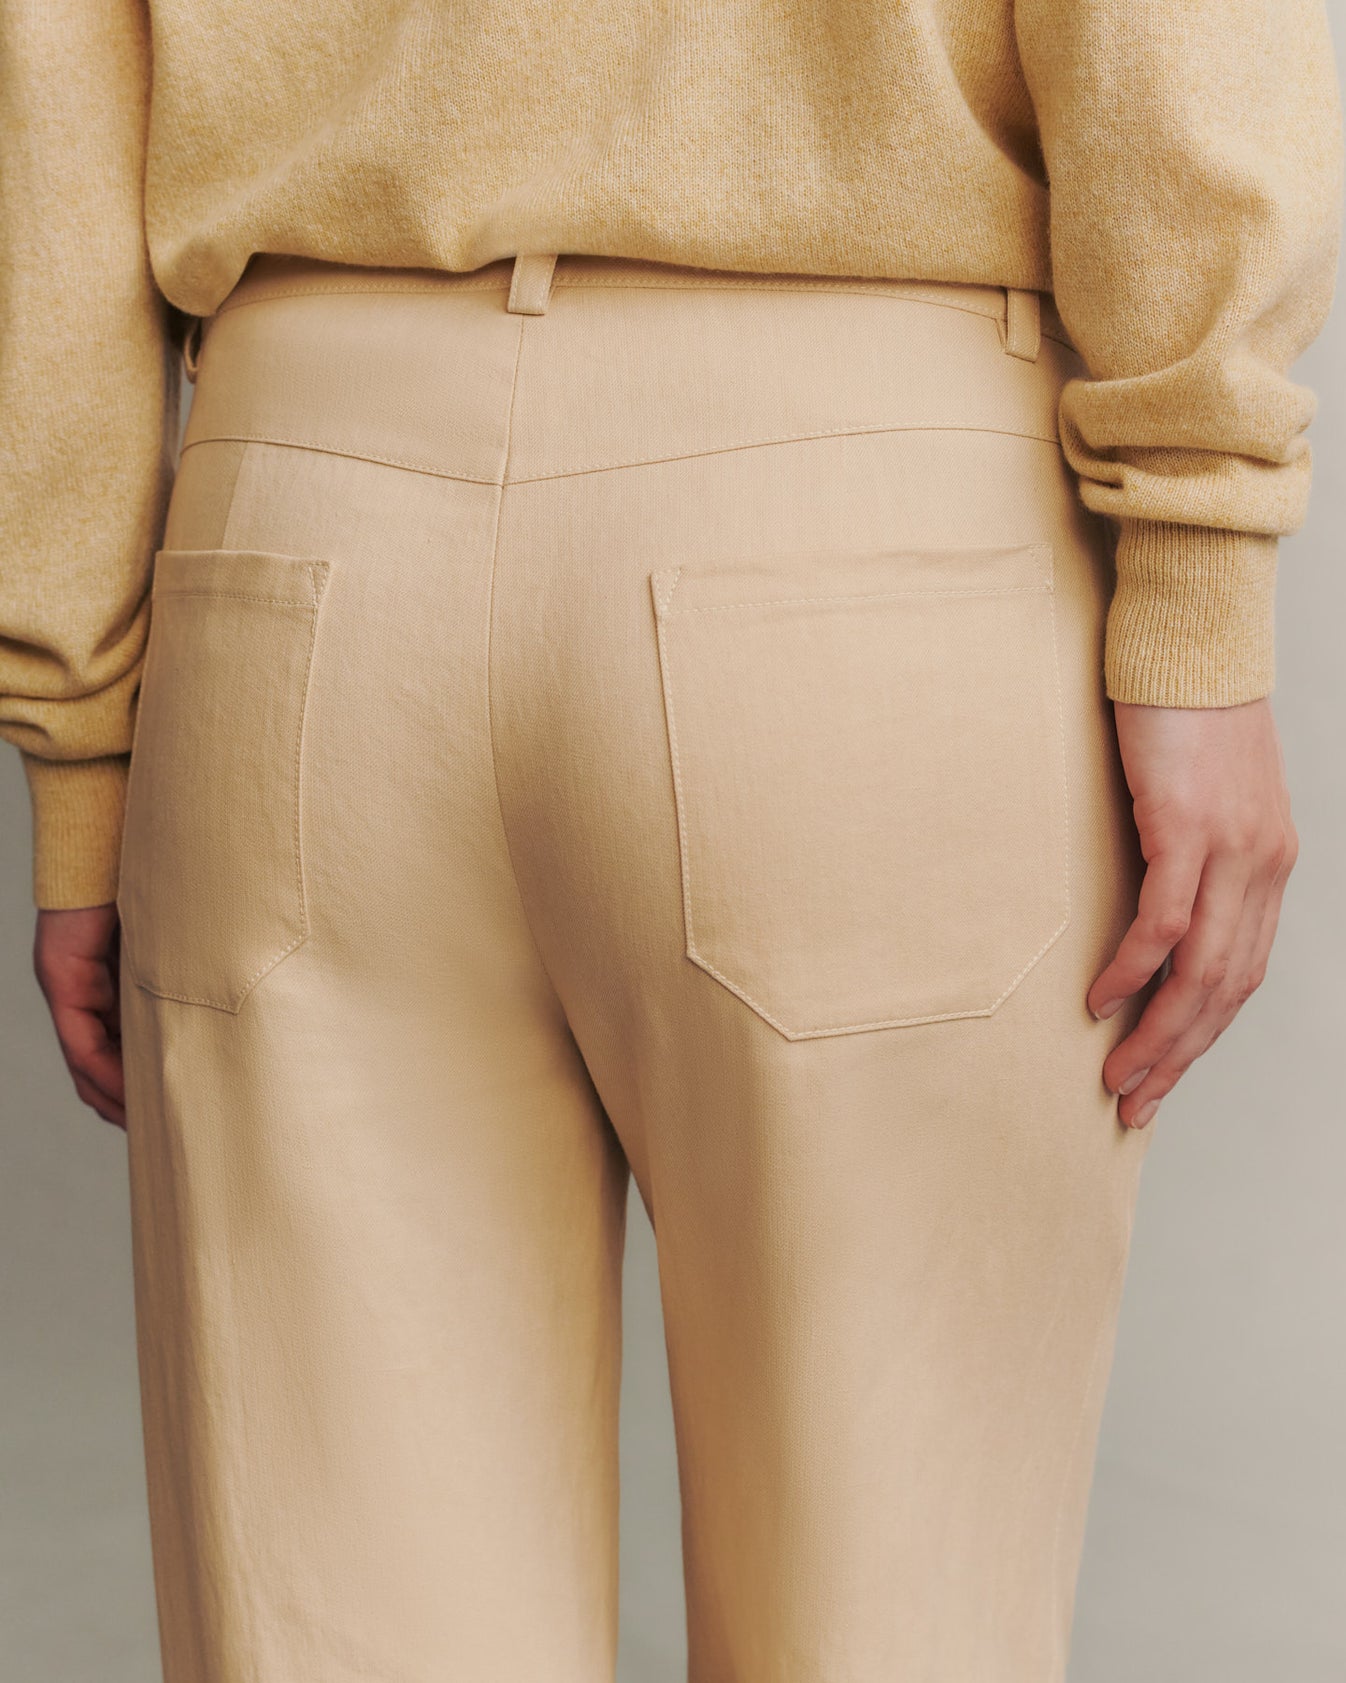 TWP Butter Howard Pant in Cotton Linen view 4